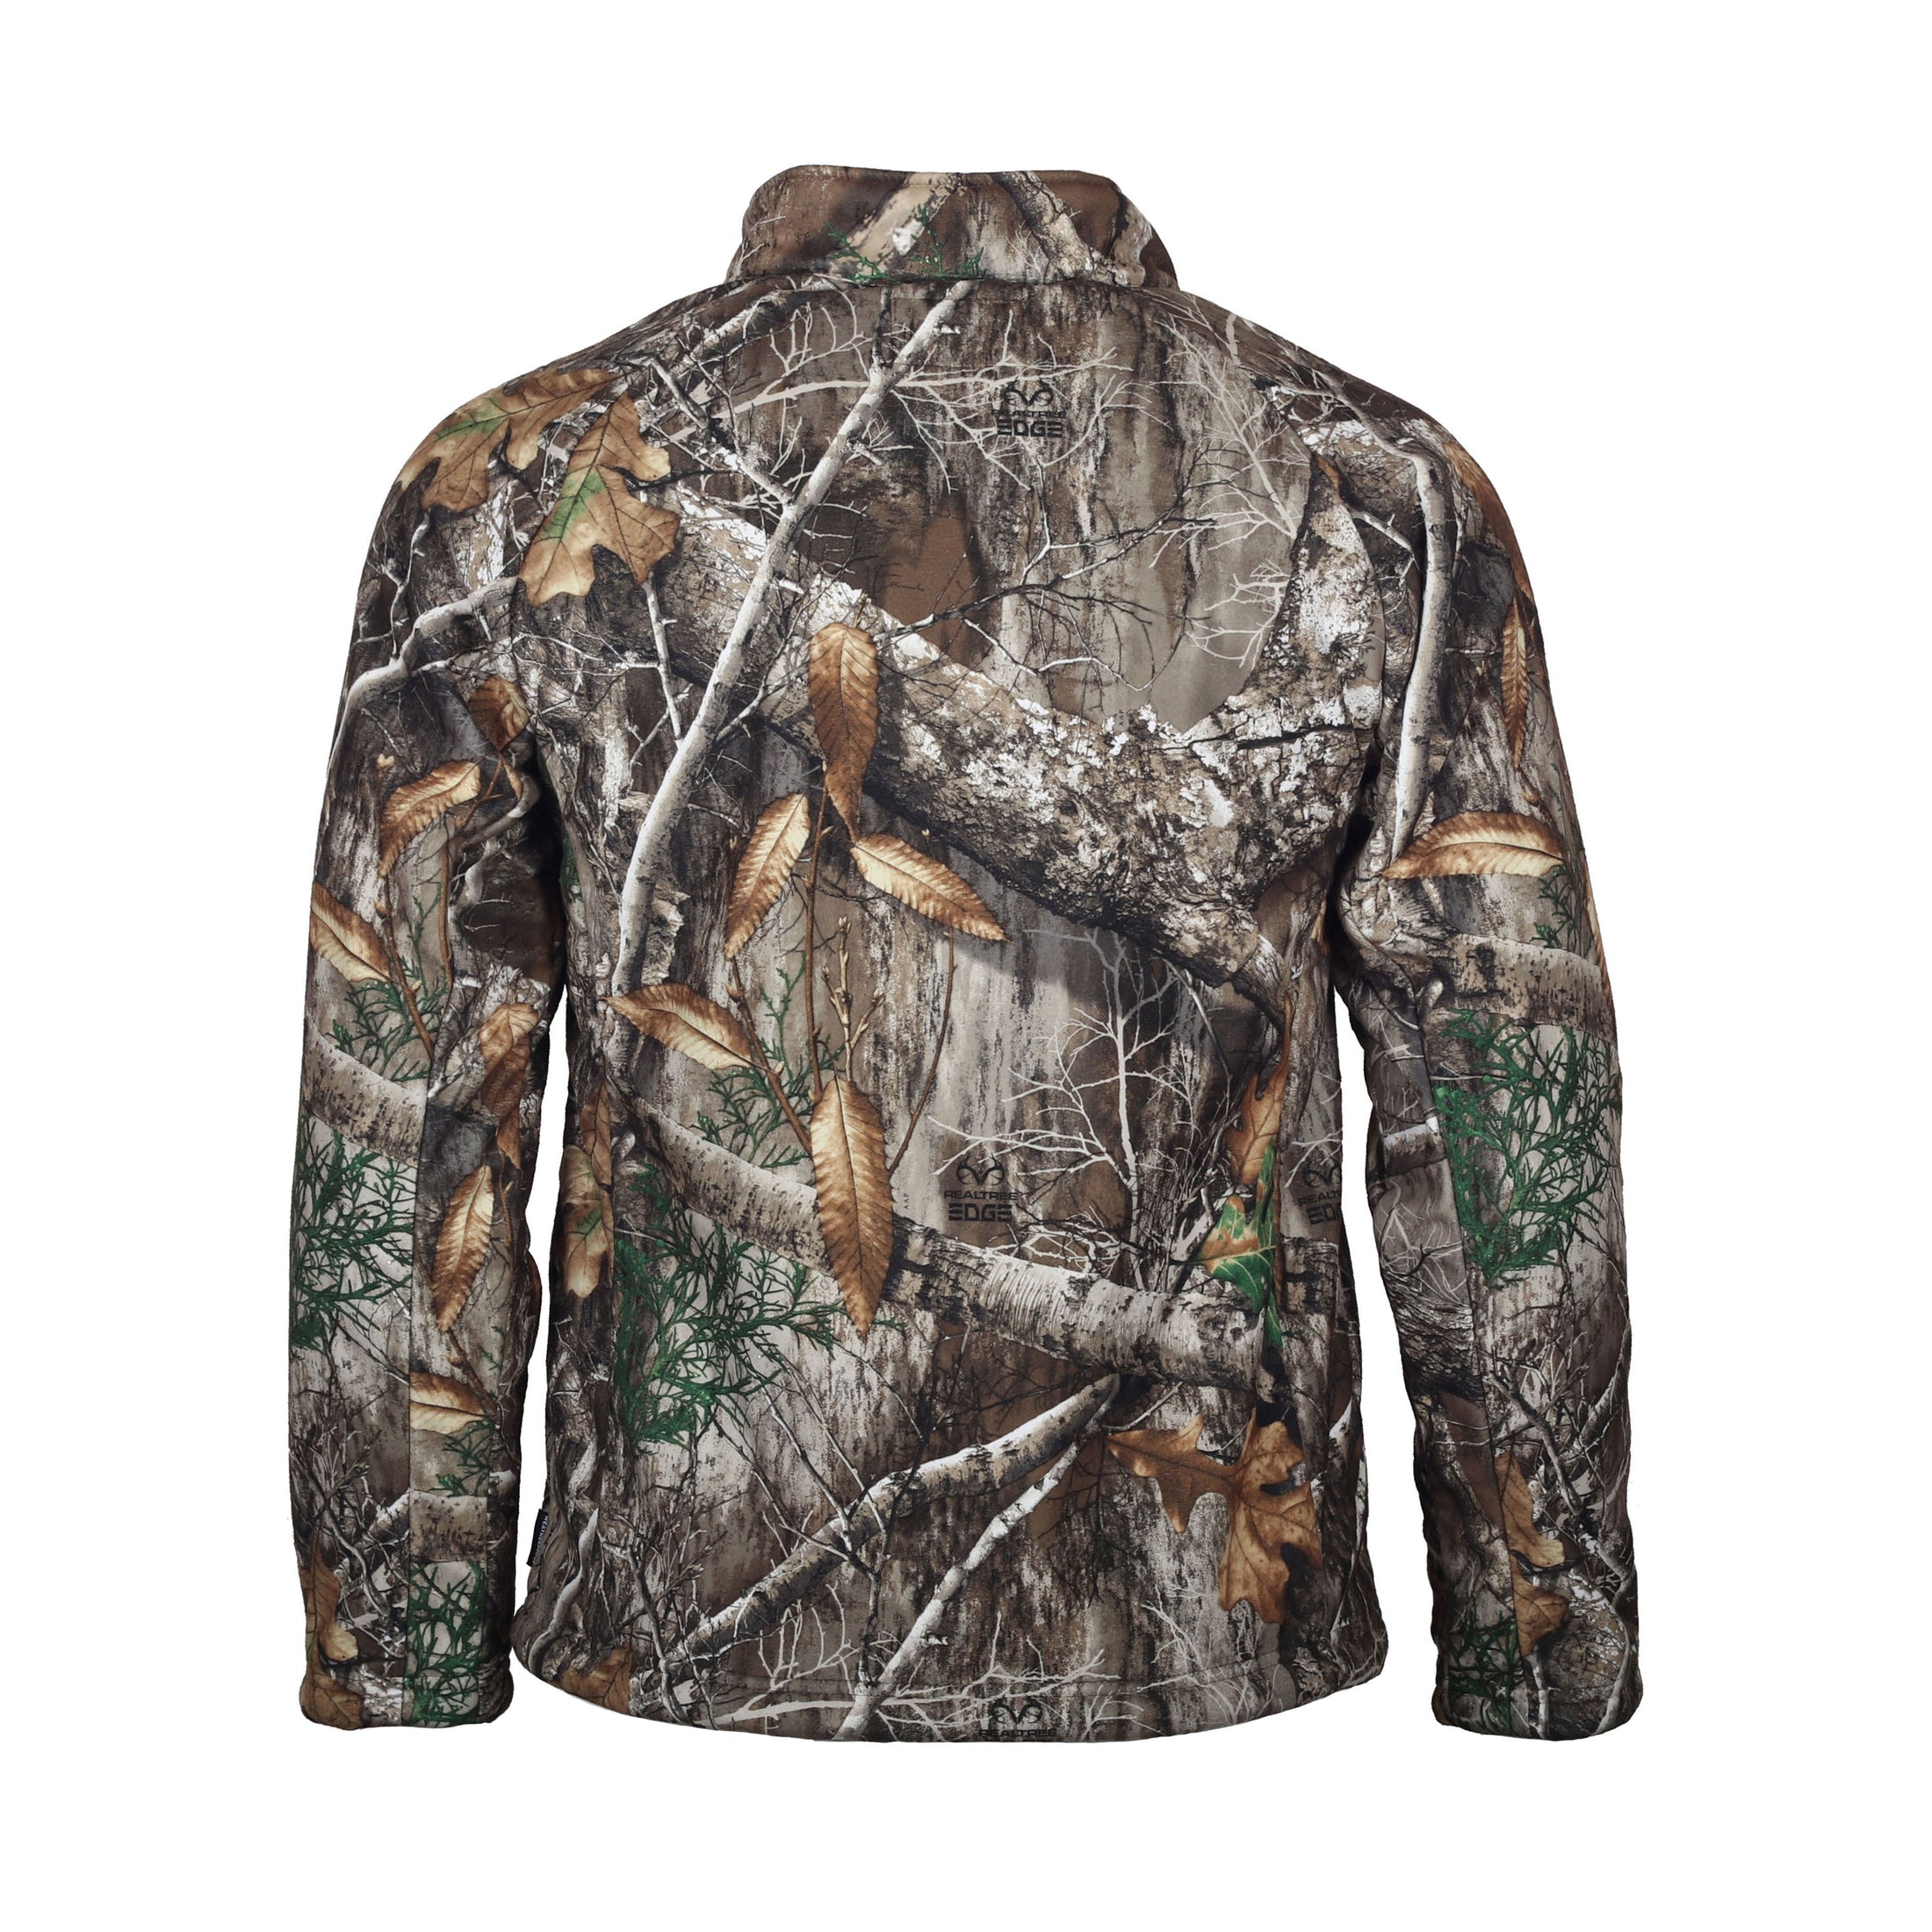 gamehide Pinch Point Jacket back (realtree edge)